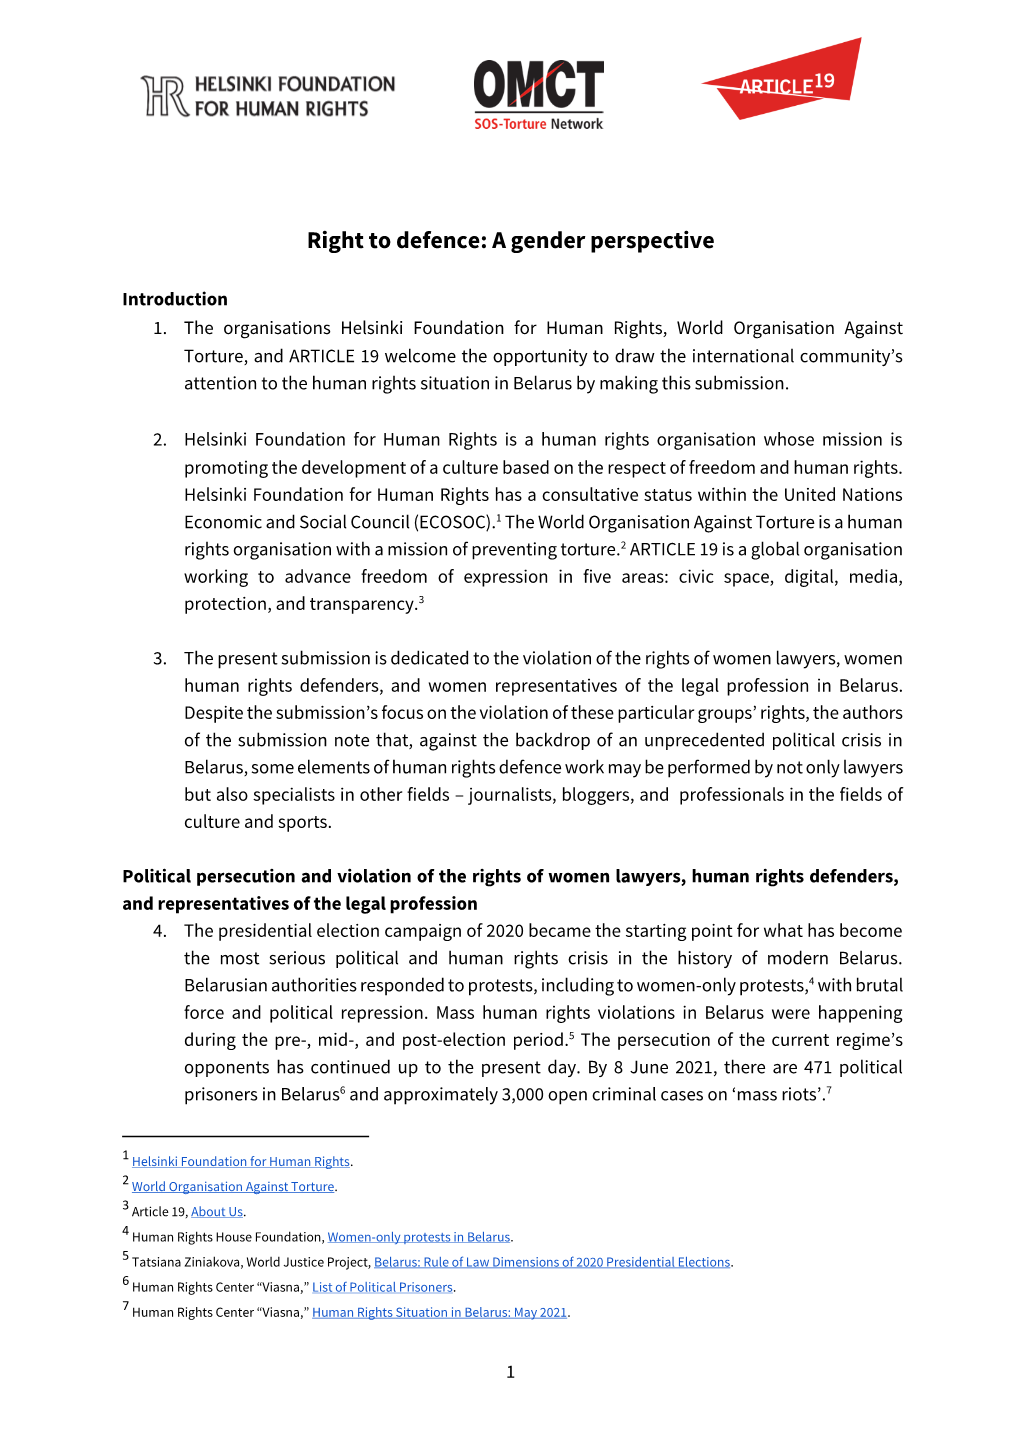 Right to Defence: a Gender Perspective